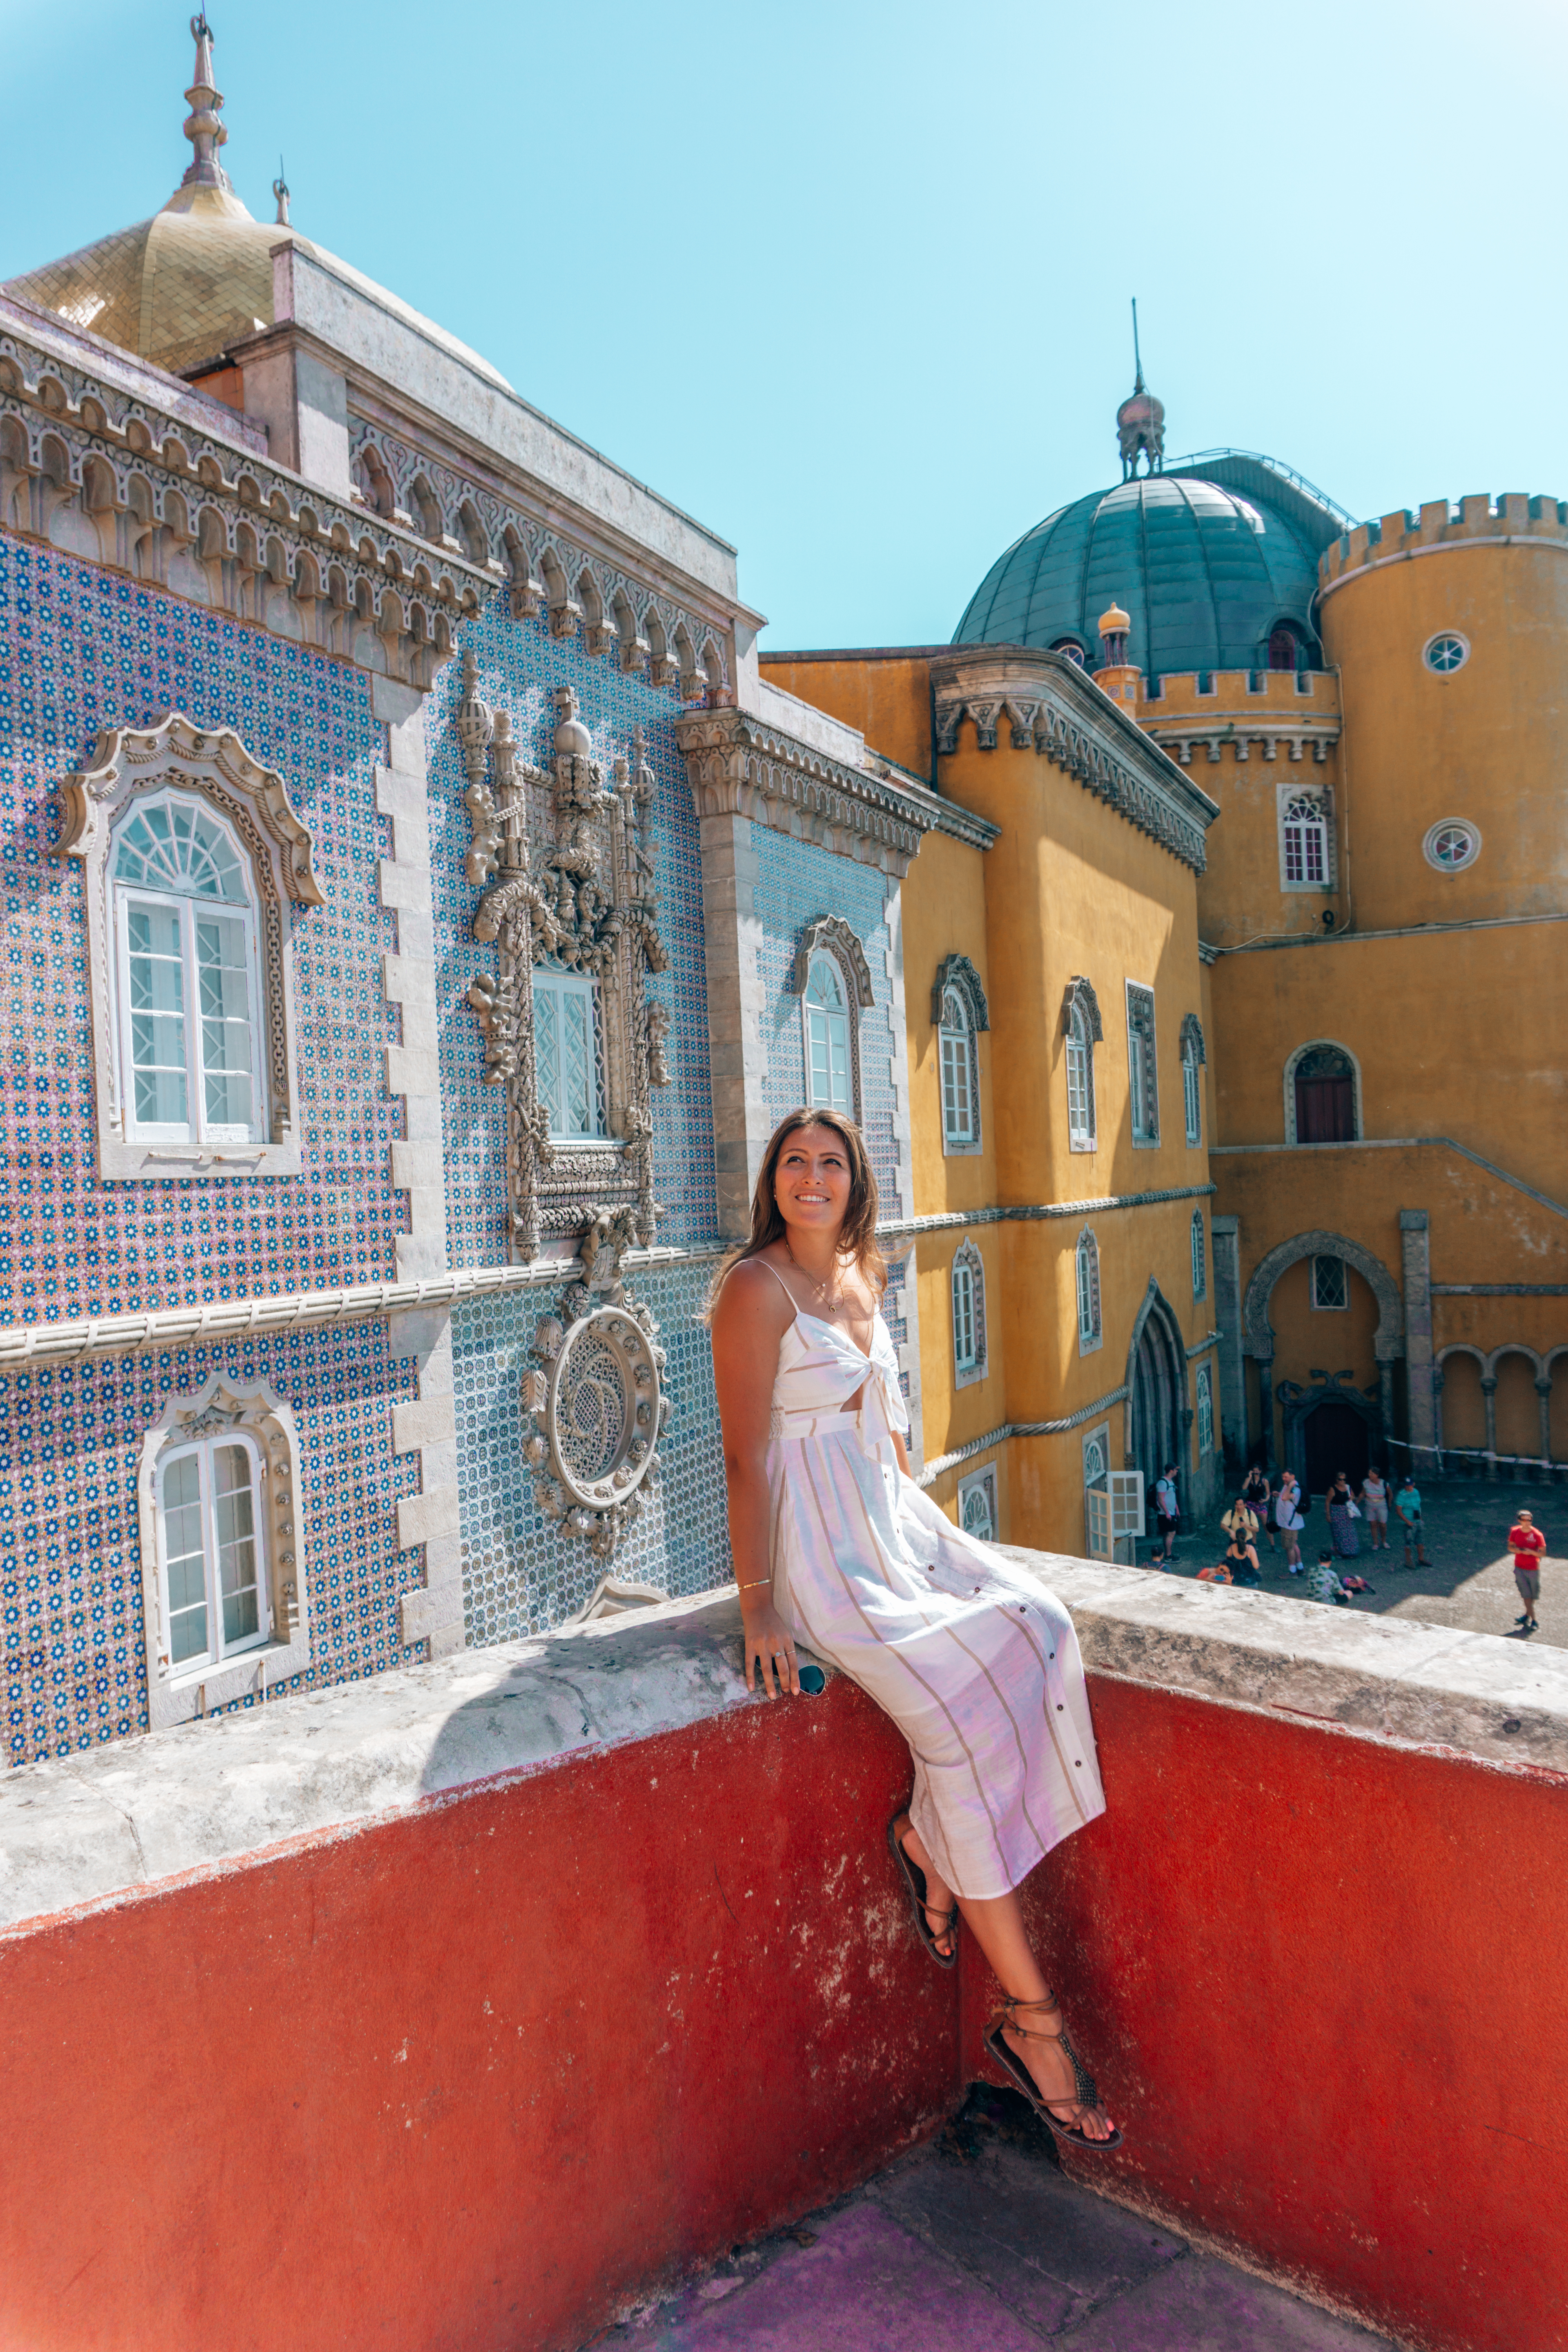 A girl in a white dress sits on a red ledge at the Pena Palace in Sintra, outside of Lisbon, Portugal.